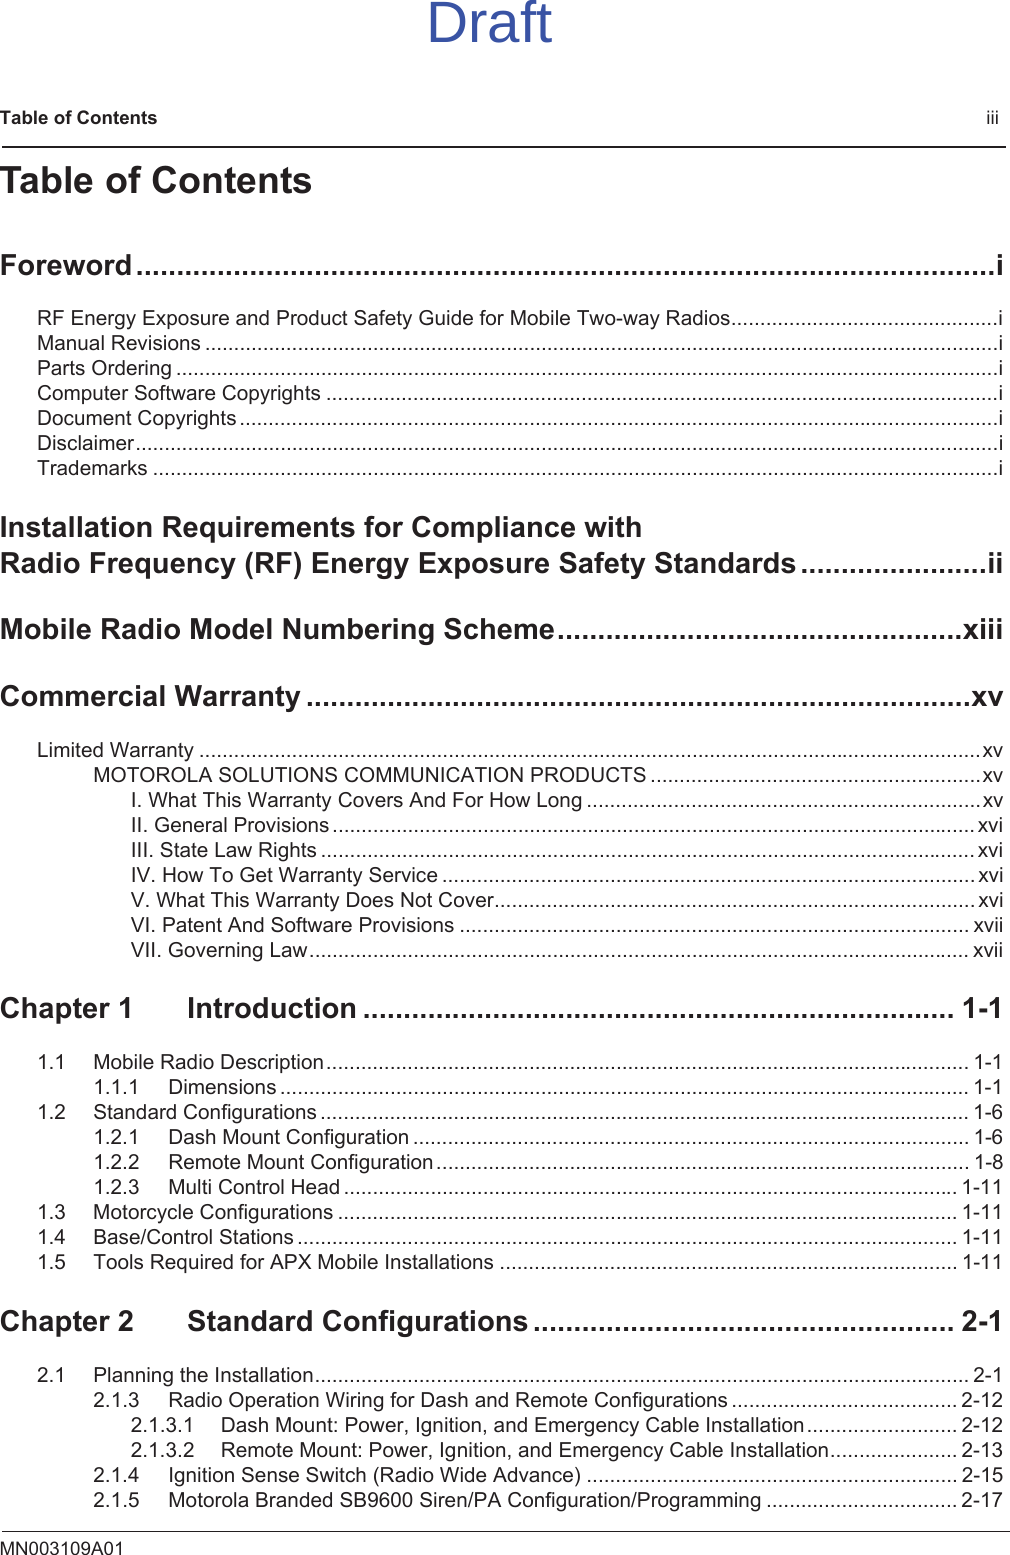 Table of Contents                                                                                              iiiMN003109A01Table of ContentsForeword..........................................................................................................iRF Energy Exposure and Product Safety Guide for Mobile Two-way Radios..............................................iManual Revisions .........................................................................................................................................iParts Ordering ..............................................................................................................................................iComputer Software Copyrights ....................................................................................................................iDocument Copyrights ...................................................................................................................................iDisclaimer.....................................................................................................................................................iTrademarks ..................................................................................................................................................iInstallation Requirements for Compliance with Radio Frequency (RF) Energy Exposure Safety Standards.......................iiMobile Radio Model Numbering Scheme..................................................xiiiCommercial Warranty ..................................................................................xvLimited Warranty .......................................................................................................................................xvMOTOROLA SOLUTIONS COMMUNICATION PRODUCTS .........................................................xvI. What This Warranty Covers And For How Long ....................................................................xvII. General Provisions ............................................................................................................... xviIII. State Law Rights ................................................................................................................. xviIV. How To Get Warranty Service ............................................................................................ xviV. What This Warranty Does Not Cover................................................................................... xviVI. Patent And Software Provisions ........................................................................................ xviiVII. Governing Law.................................................................................................................. xviiChapter 1 Introduction ......................................................................... 1-11.1 Mobile Radio Description............................................................................................................... 1-11.1.1 Dimensions ....................................................................................................................... 1-11.2 Standard Configurations ................................................................................................................ 1-61.2.1 Dash Mount Configuration ................................................................................................ 1-61.2.2 Remote Mount Configuration............................................................................................ 1-81.2.3 Multi Control Head .......................................................................................................... 1-111.3 Motorcycle Configurations ........................................................................................................... 1-111.4 Base/Control Stations .................................................................................................................. 1-111.5 Tools Required for APX Mobile Installations ............................................................................... 1-11Chapter 2 Standard Configurations .................................................... 2-12.1 Planning the Installation................................................................................................................. 2-12.1.3 Radio Operation Wiring for Dash and Remote Configurations ....................................... 2-122.1.3.1 Dash Mount: Power, Ignition, and Emergency Cable Installation.......................... 2-122.1.3.2 Remote Mount: Power, Ignition, and Emergency Cable Installation...................... 2-132.1.4 Ignition Sense Switch (Radio Wide Advance) ................................................................ 2-152.1.5 Motorola Branded SB9600 Siren/PA Configuration/Programming ................................. 2-17Draft